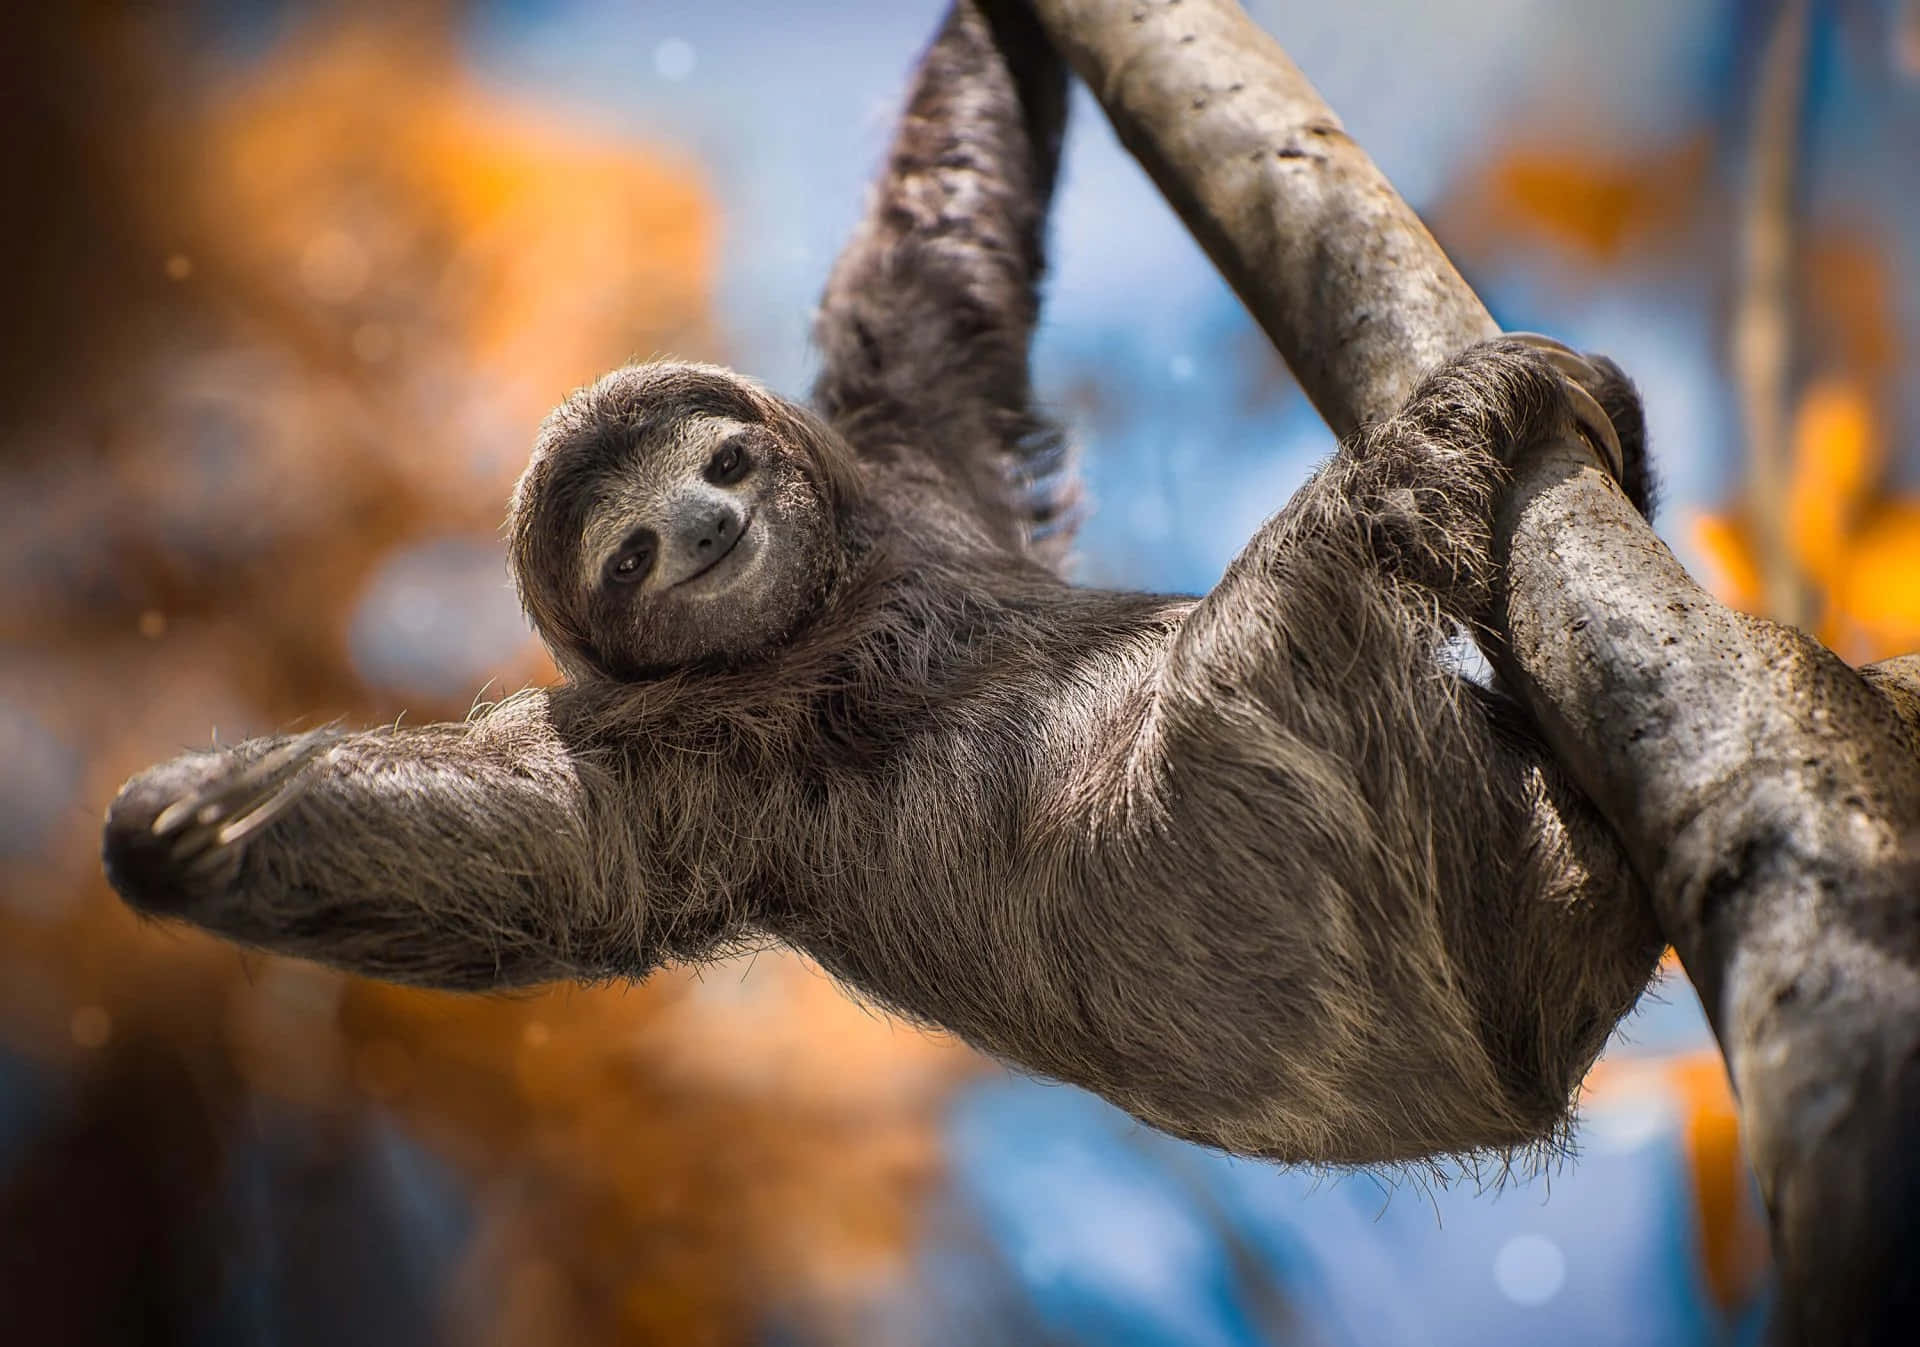 A sloth enjoying the sun and taking it slow